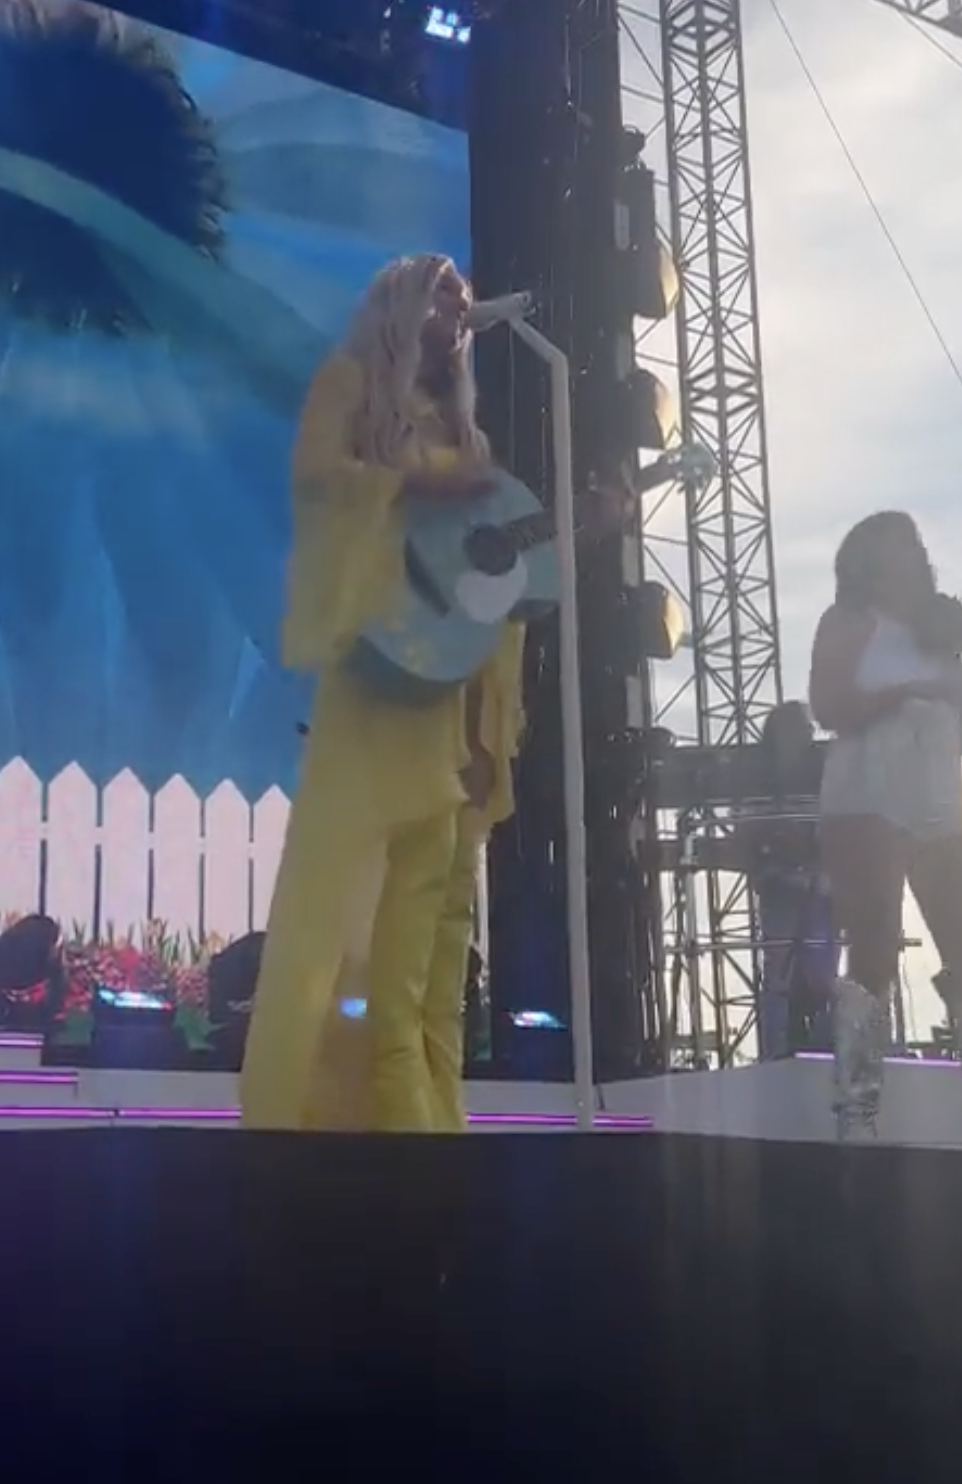 Kelsea Ballerini holding her guitar as she addresses from the stage